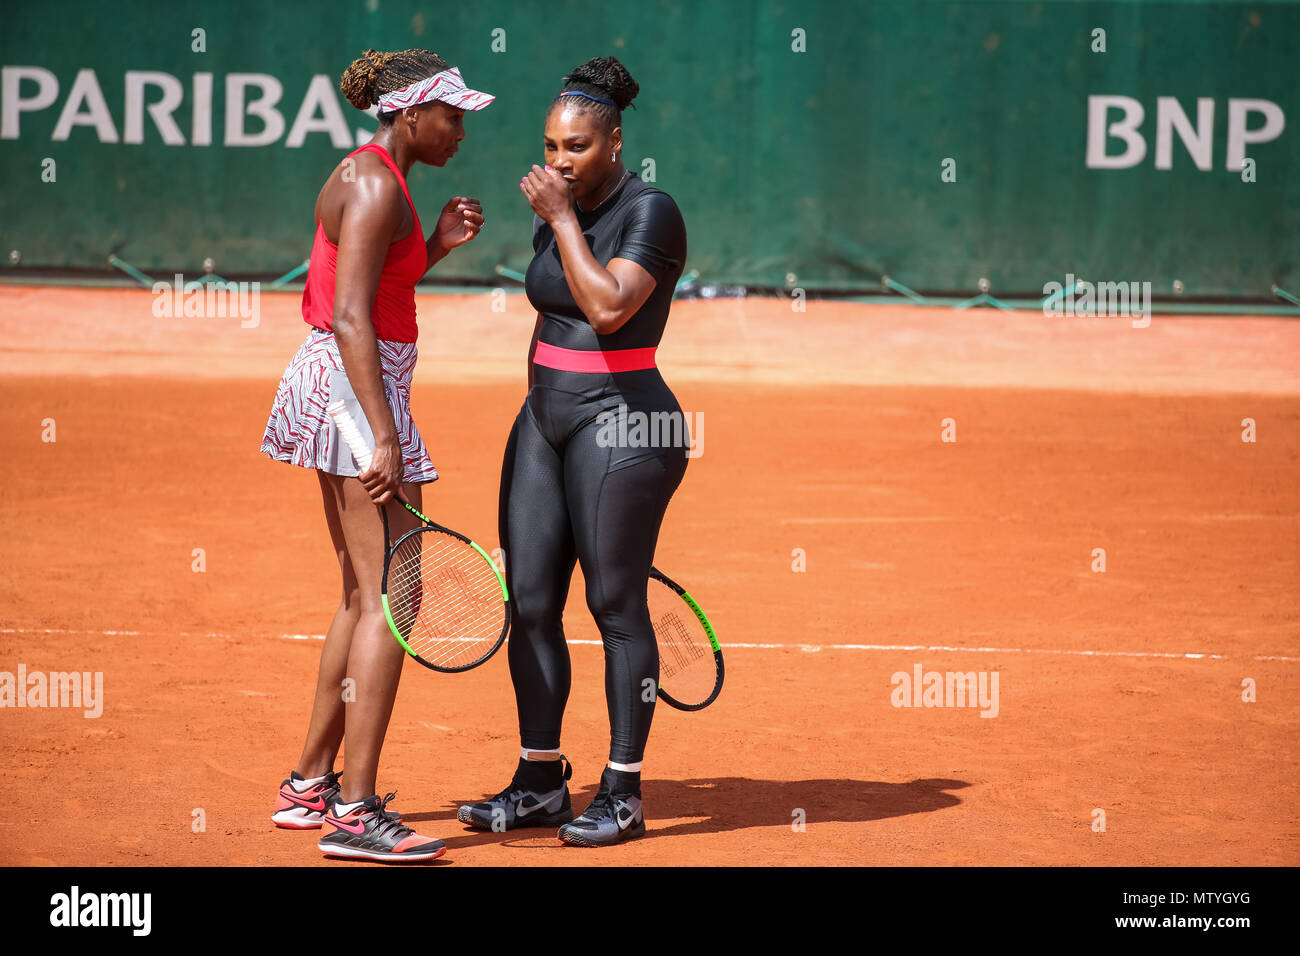 Paris, France. 30th May, 2018. (R-L) Serena Williams, Venus Williams (USA)  Tennis : (R-L) Serena Williams and Venus Williams of the United States  during the Women's doubles first round match of the